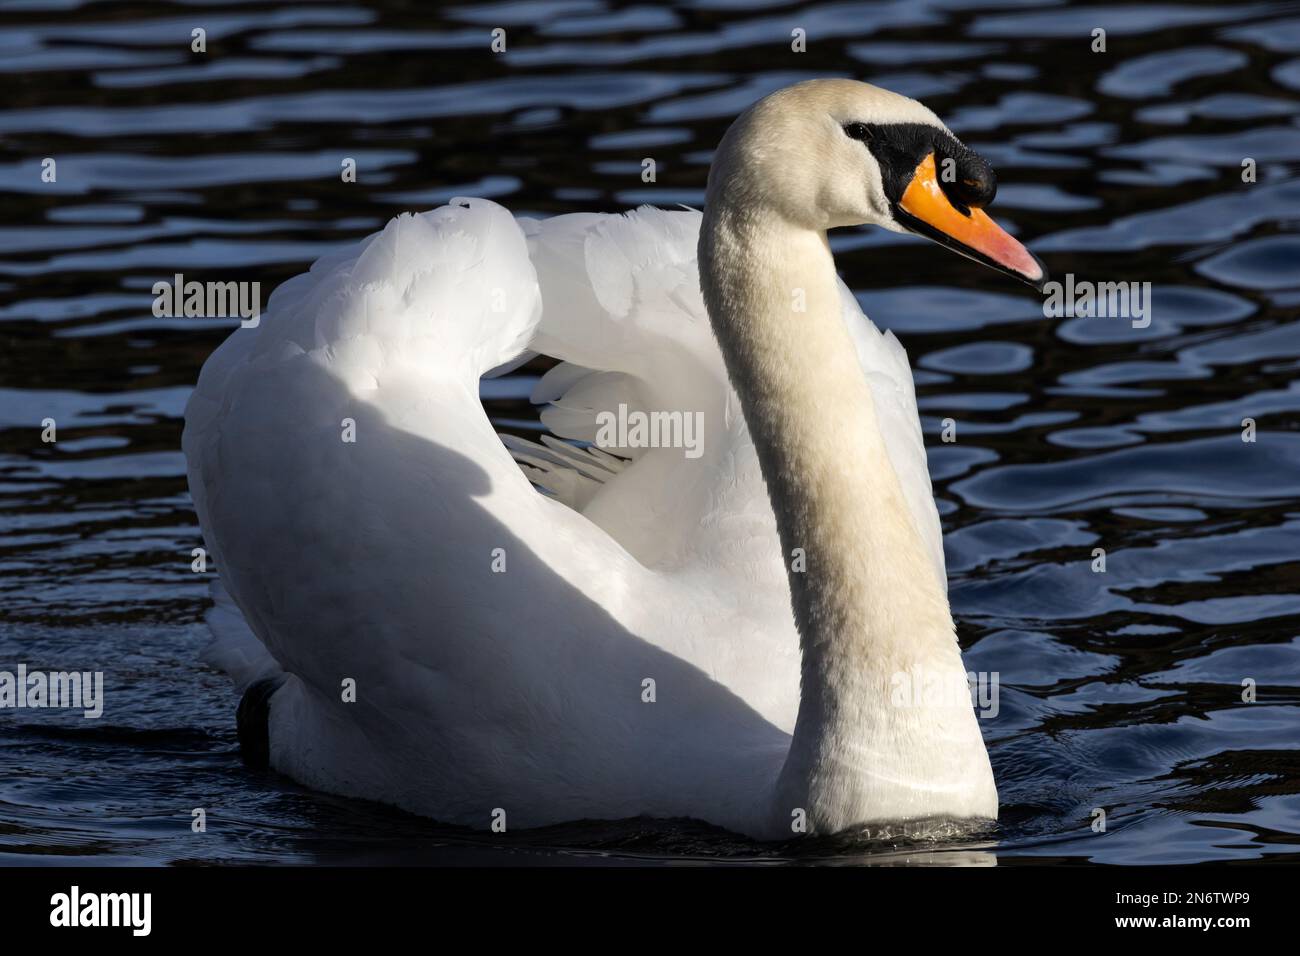 The large fleshy carbuncle at the base of the male, or cob Mute Swan shows he is in prime condition. The exaggerated wing position is a posture. Stock Photo